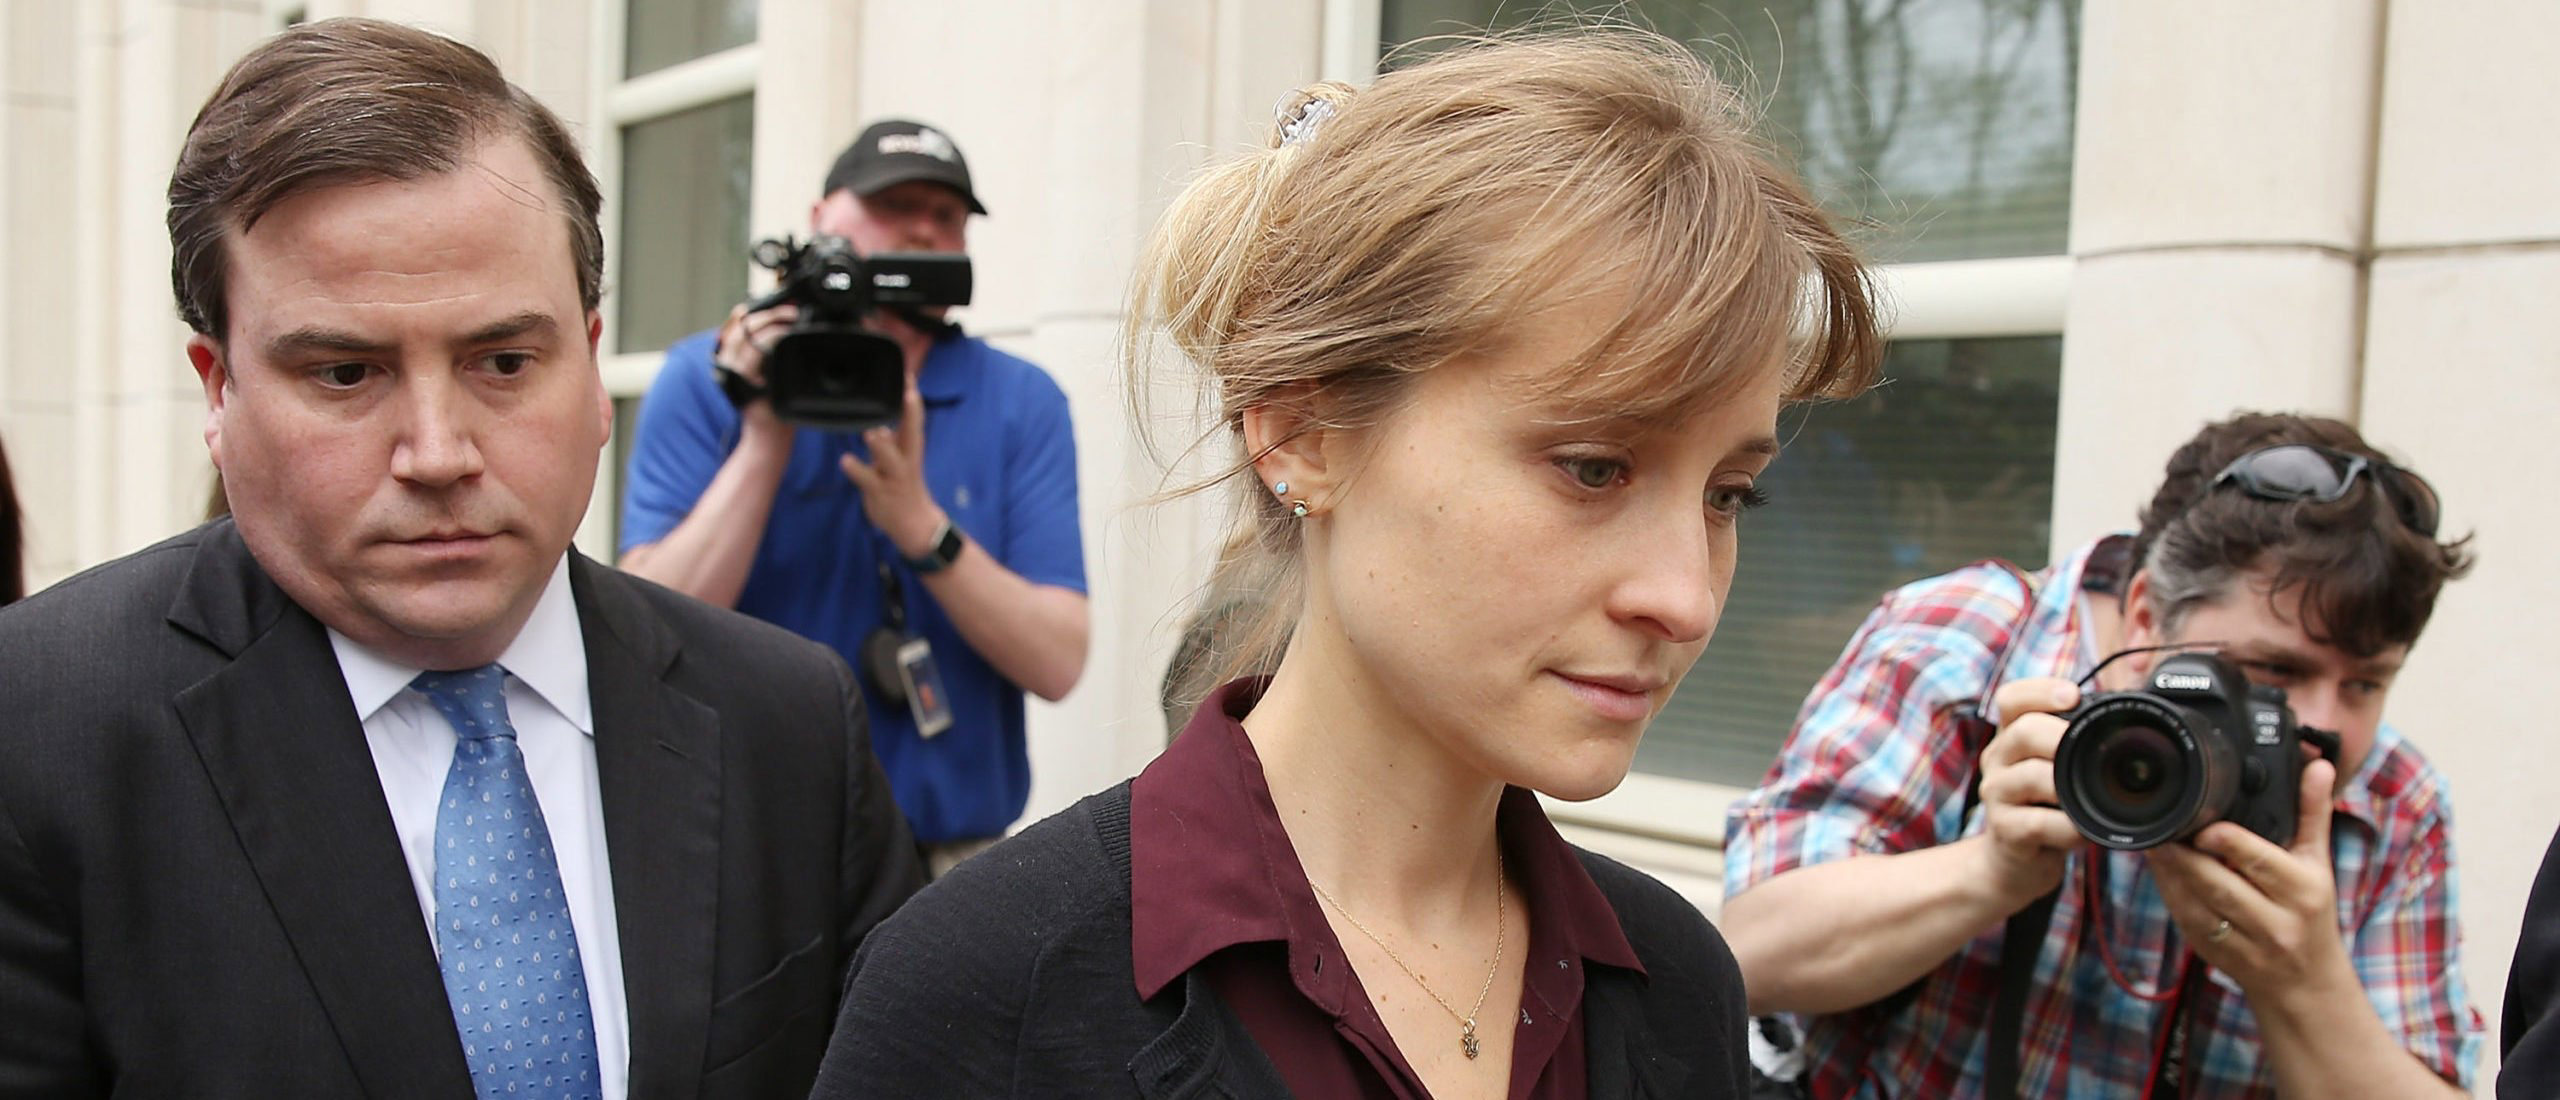 ‘smallville Actress Allison Mack Released From Prison After Sex Trafficking Cult Case